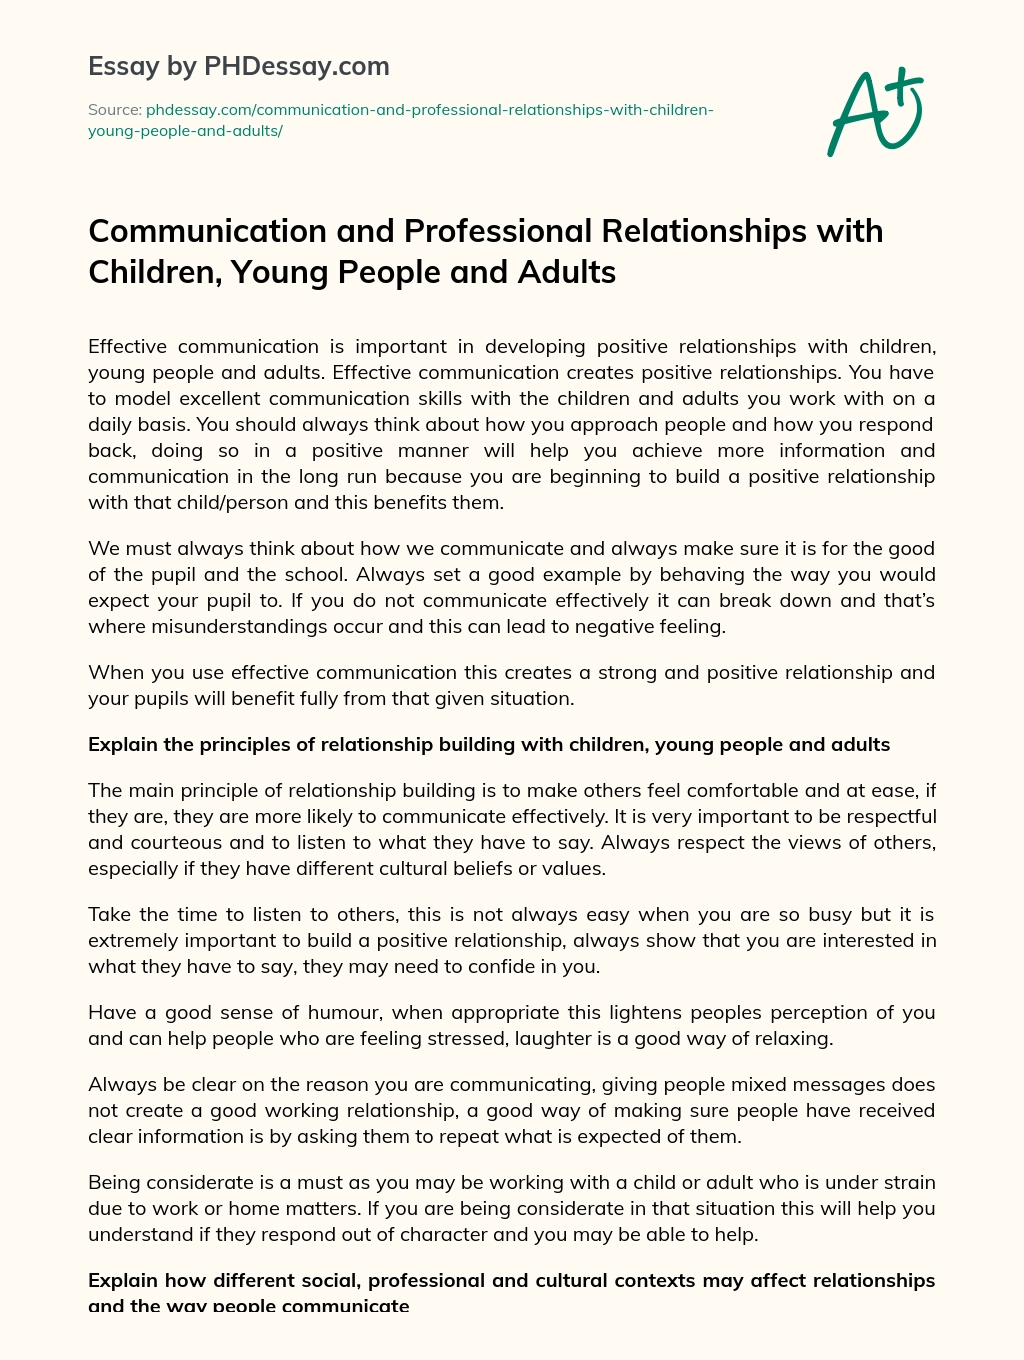 Communication and Professional Relationships with Children, Young People and Adults essay